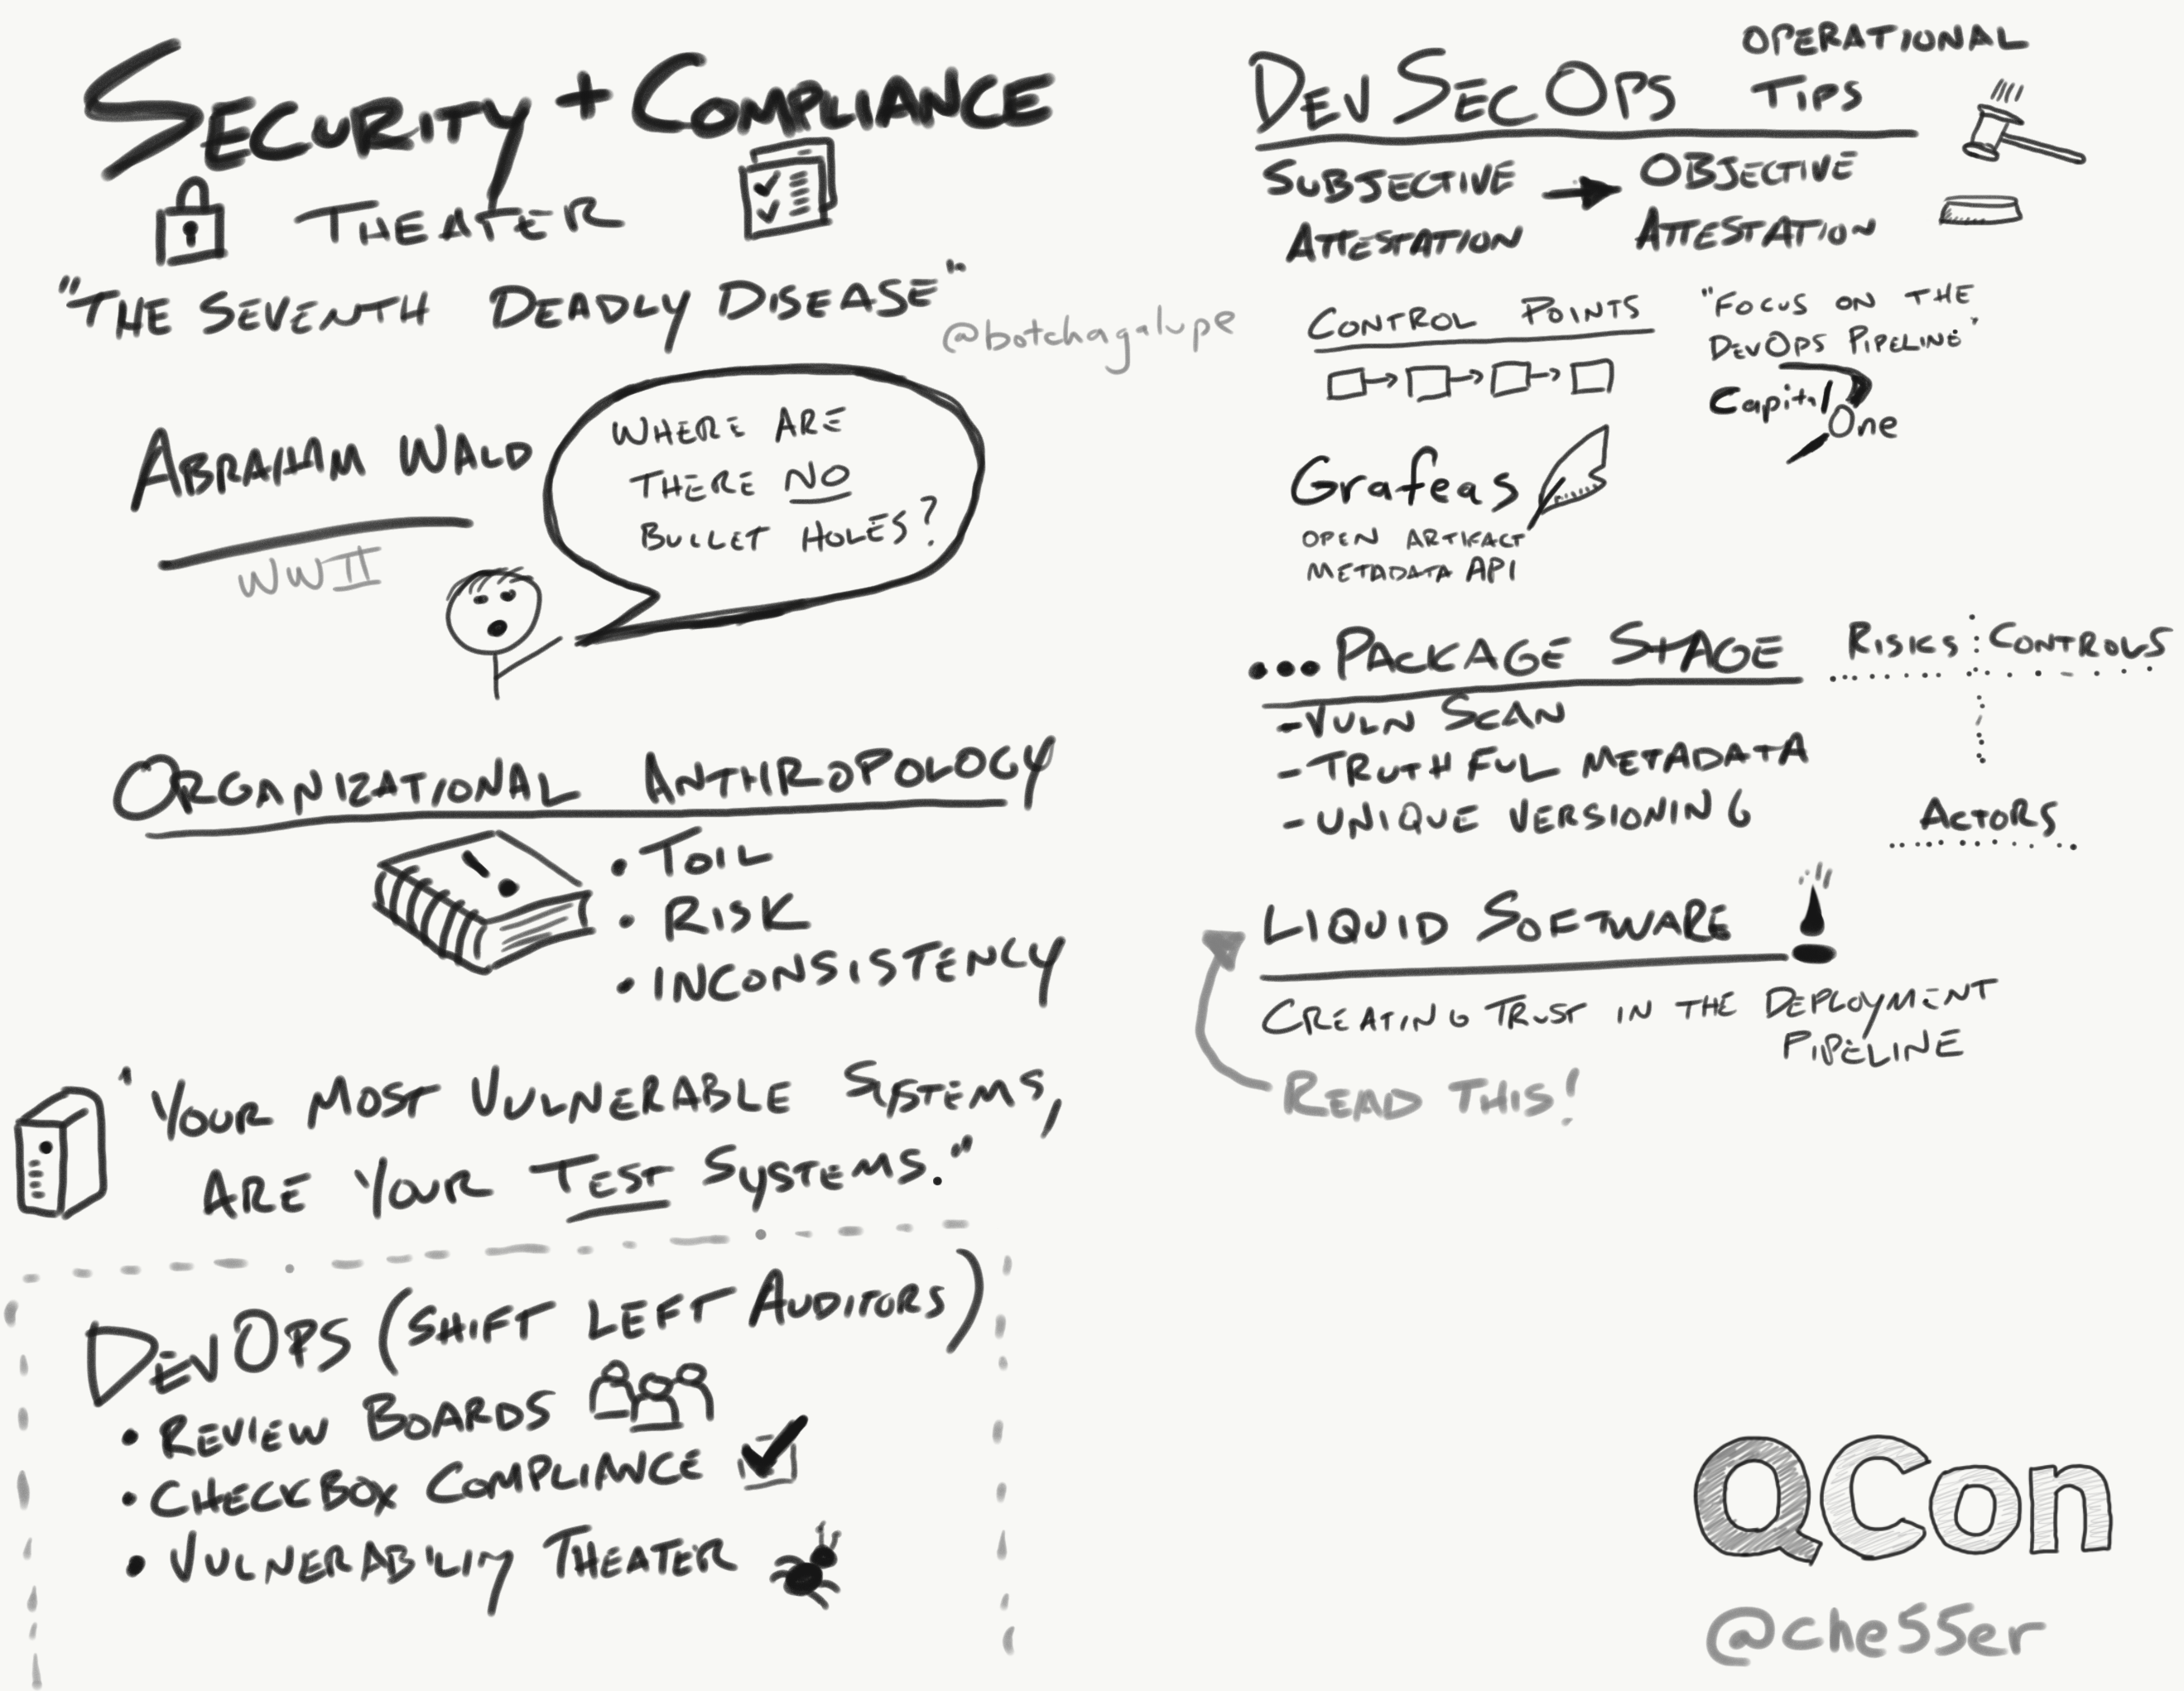 /posts/qcon-sf-2019-recap/security-and-compliance-theater.png